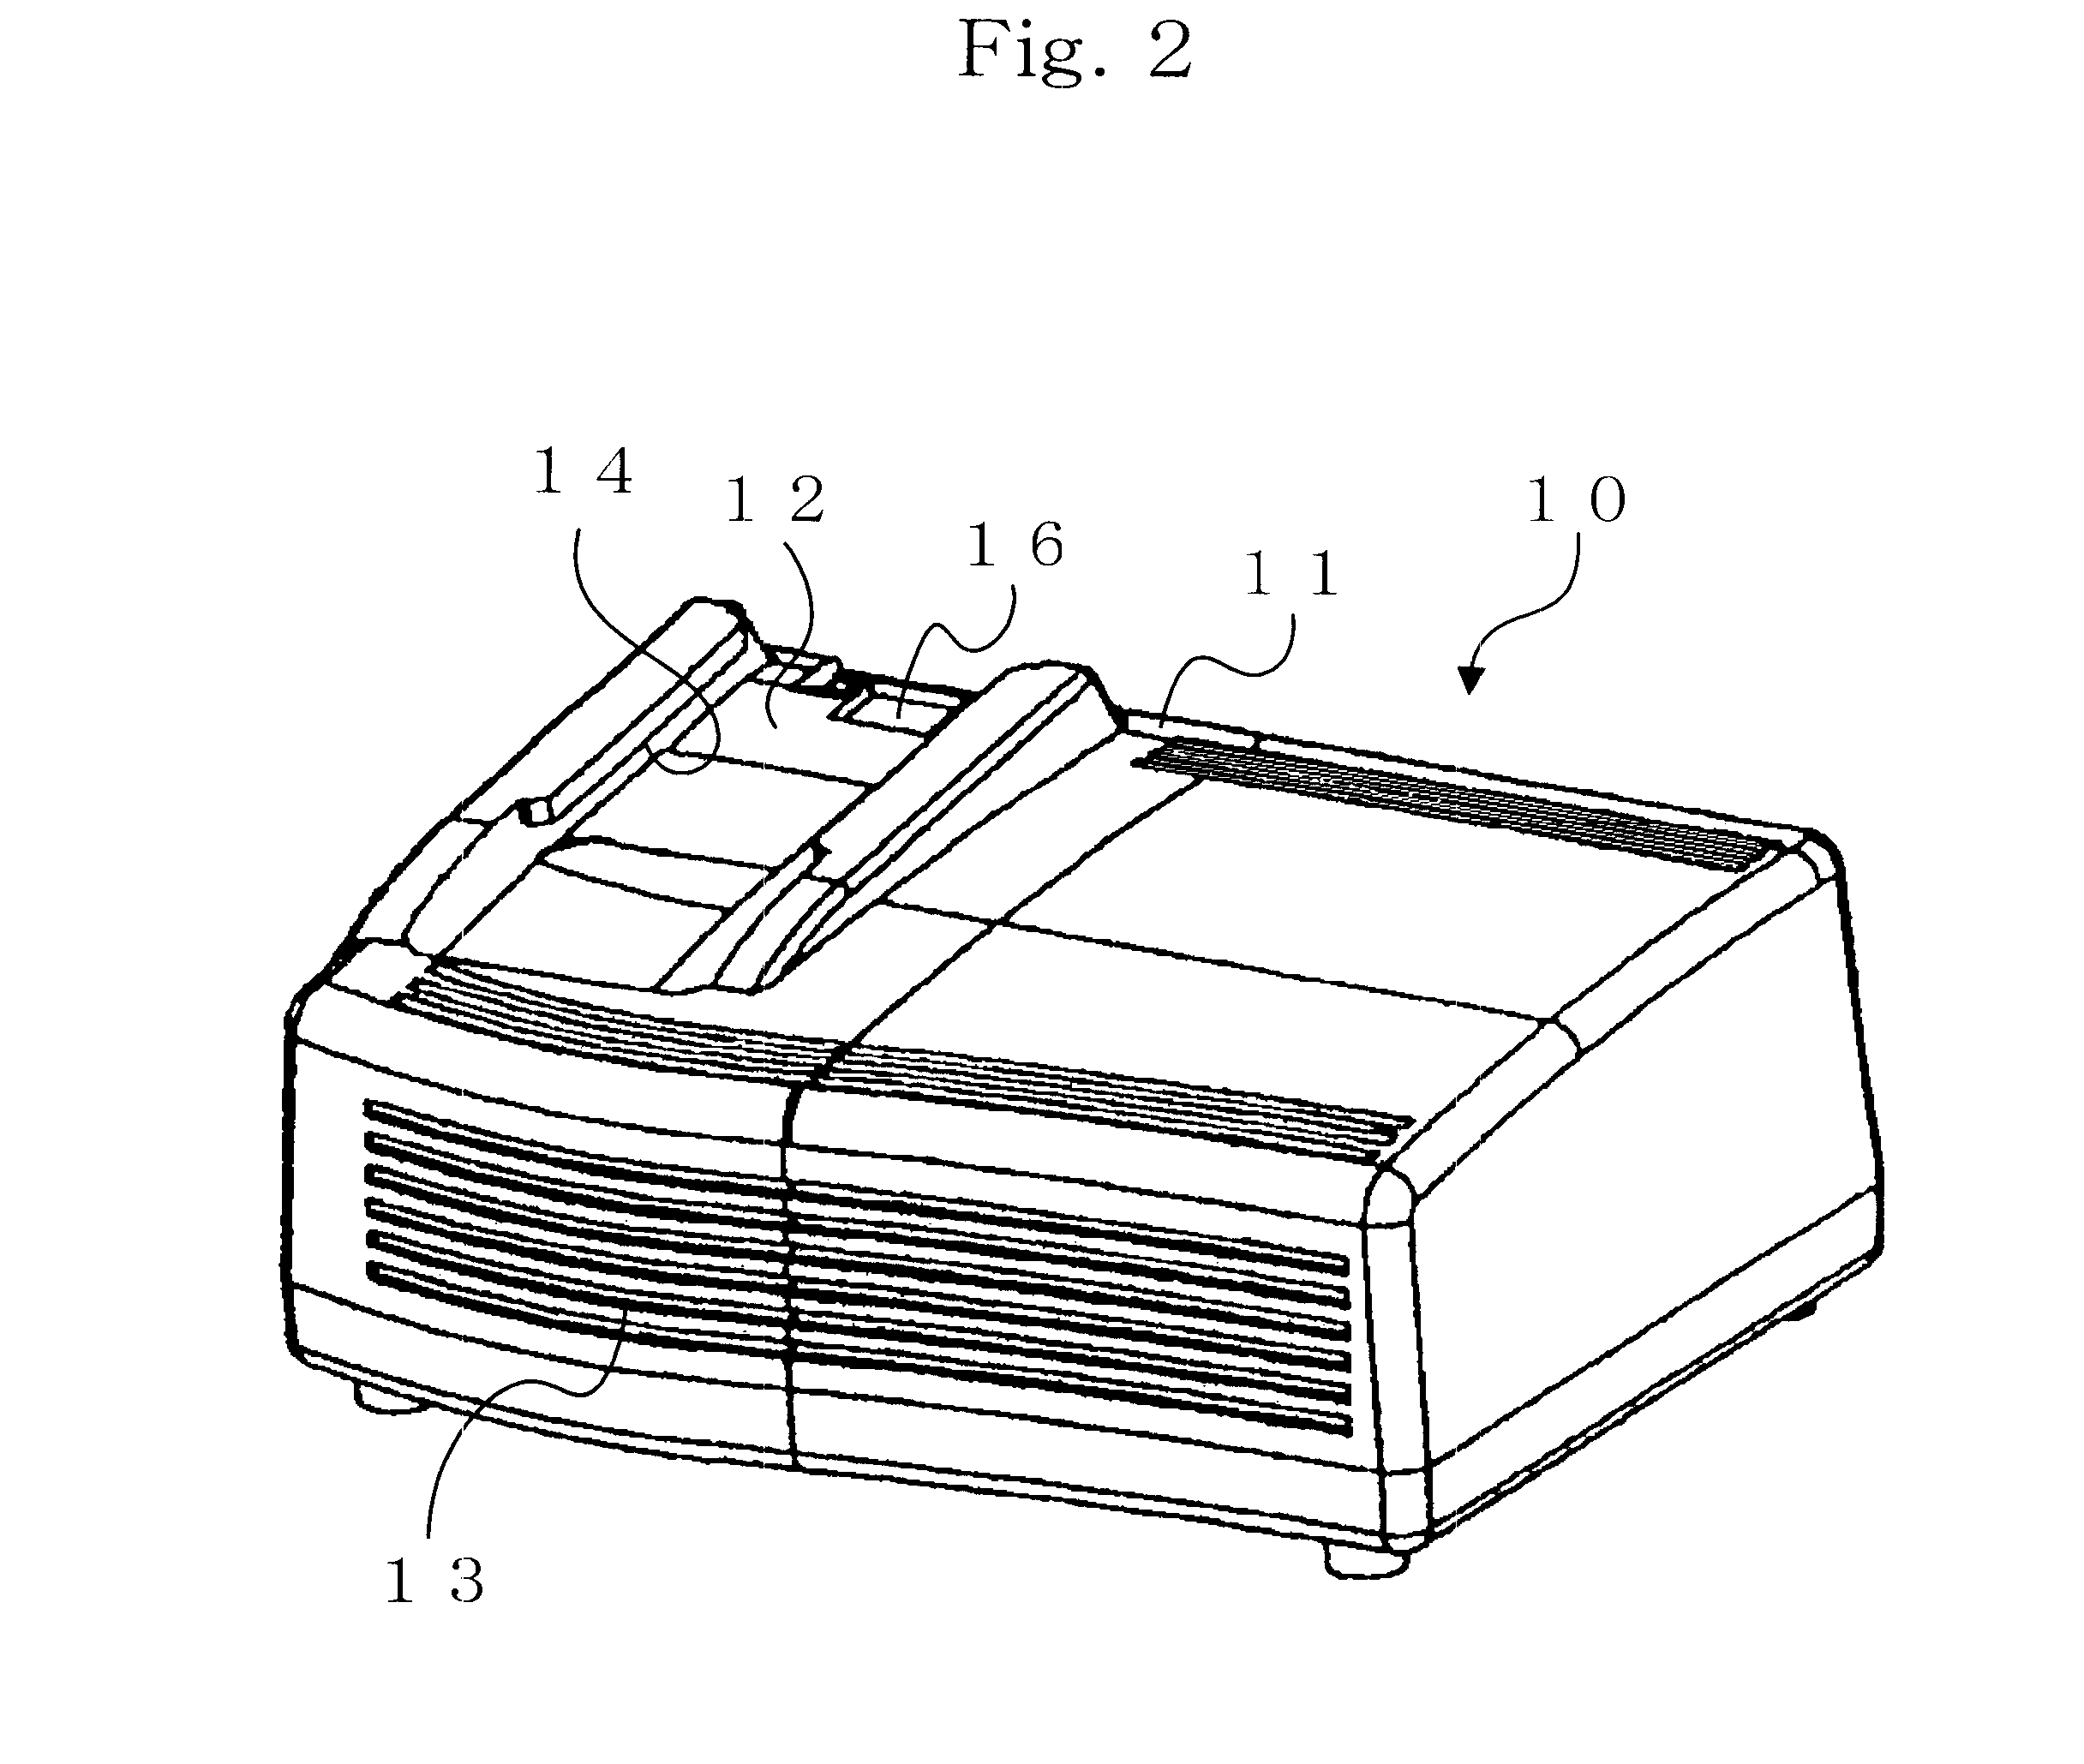 Battery pack charging system and battery pack